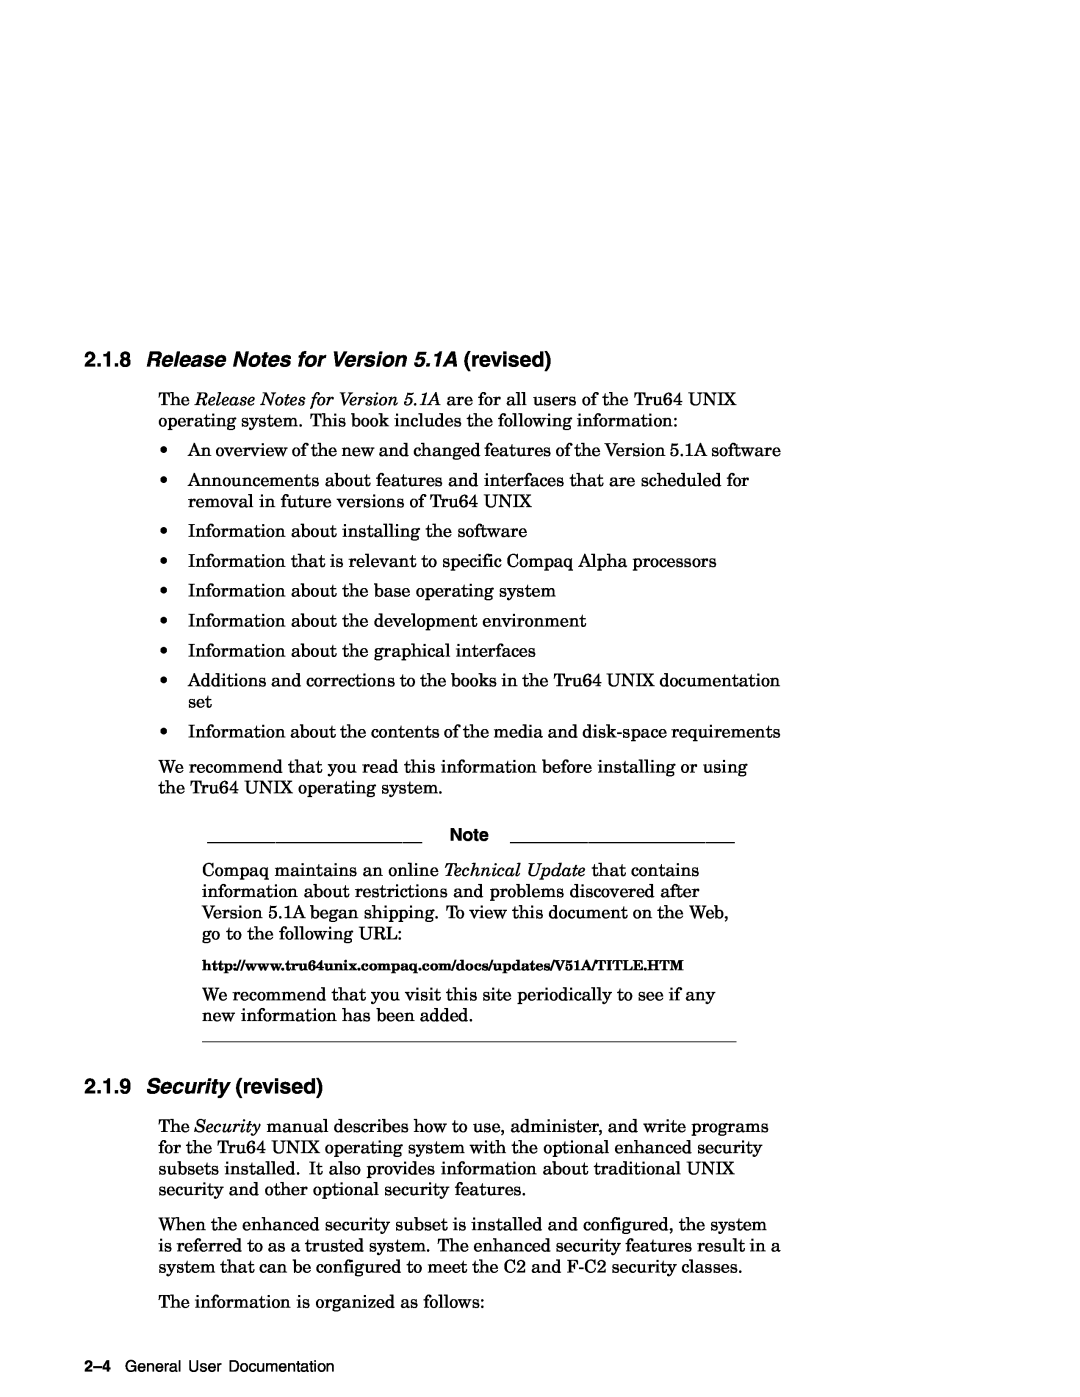 Compaq AA-RH8RD-TE manual Release Notes for Version 5.1A revised, Security revised 